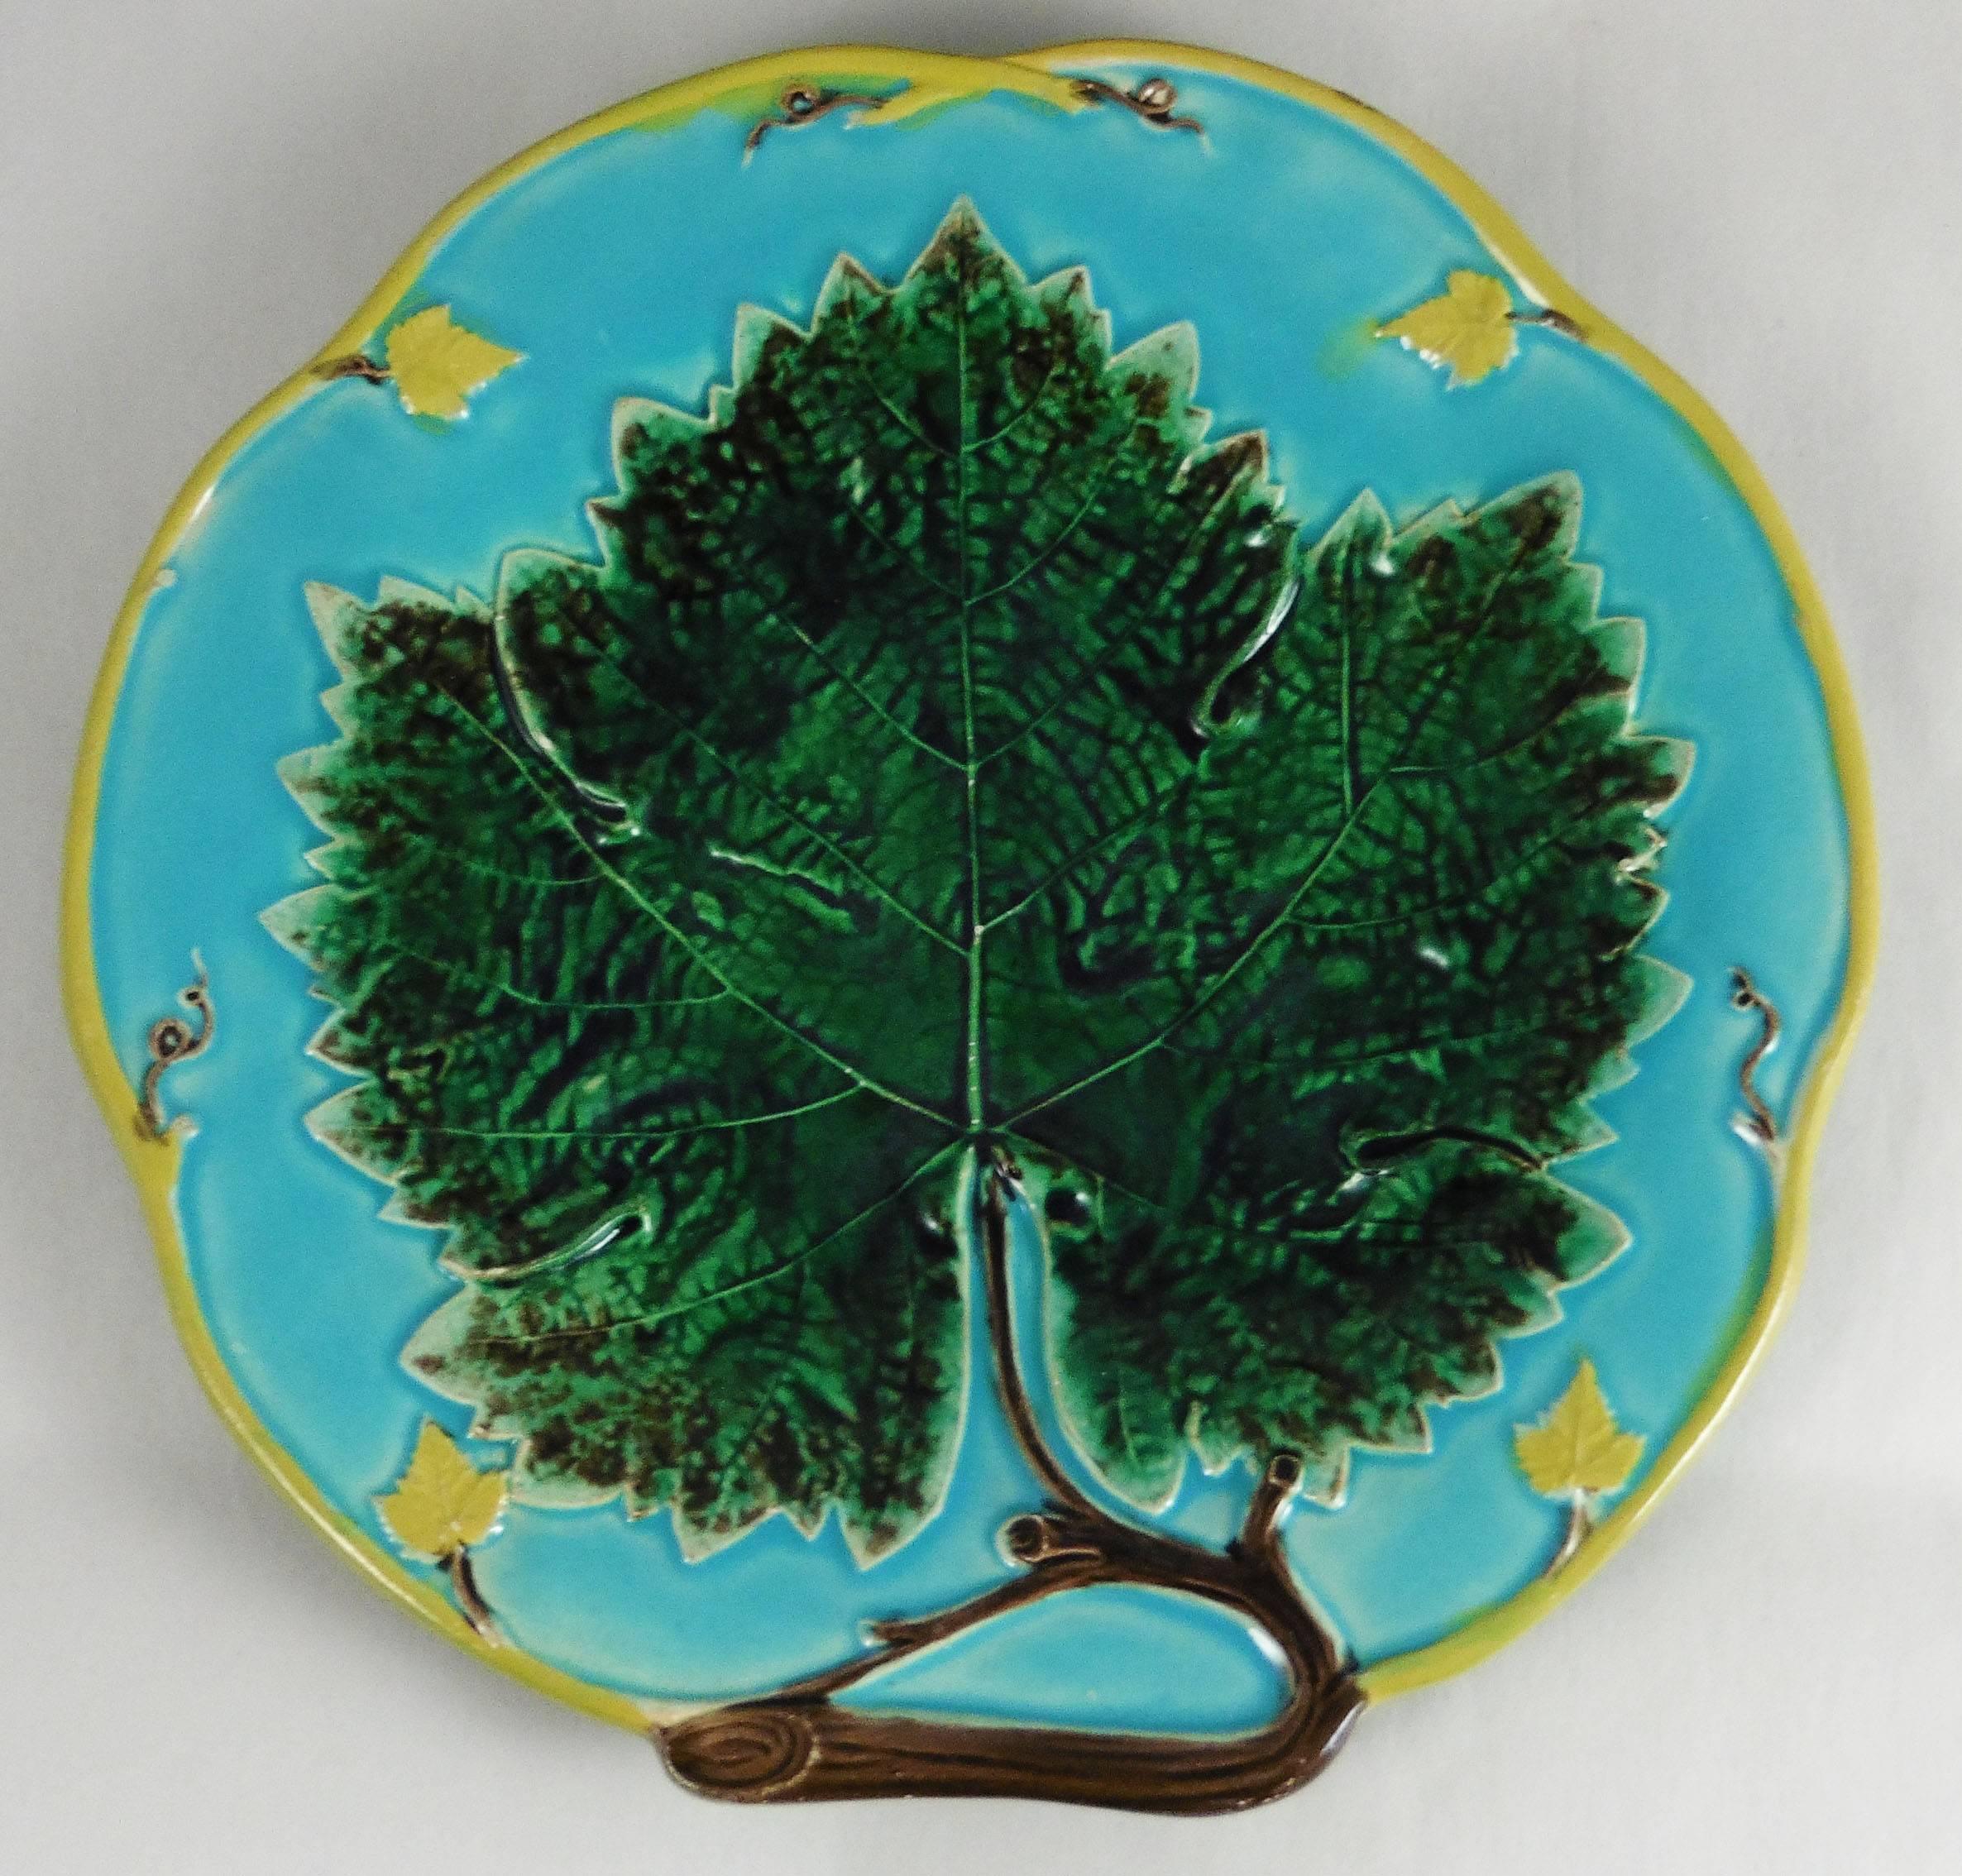 Very colorful pair of Victorian Majolica leaves plates signed Joseph Holdcroft. On a turquoise background, a large leaf with a branch who gave an unusual shape to this plates, surrounded by a yellow border.